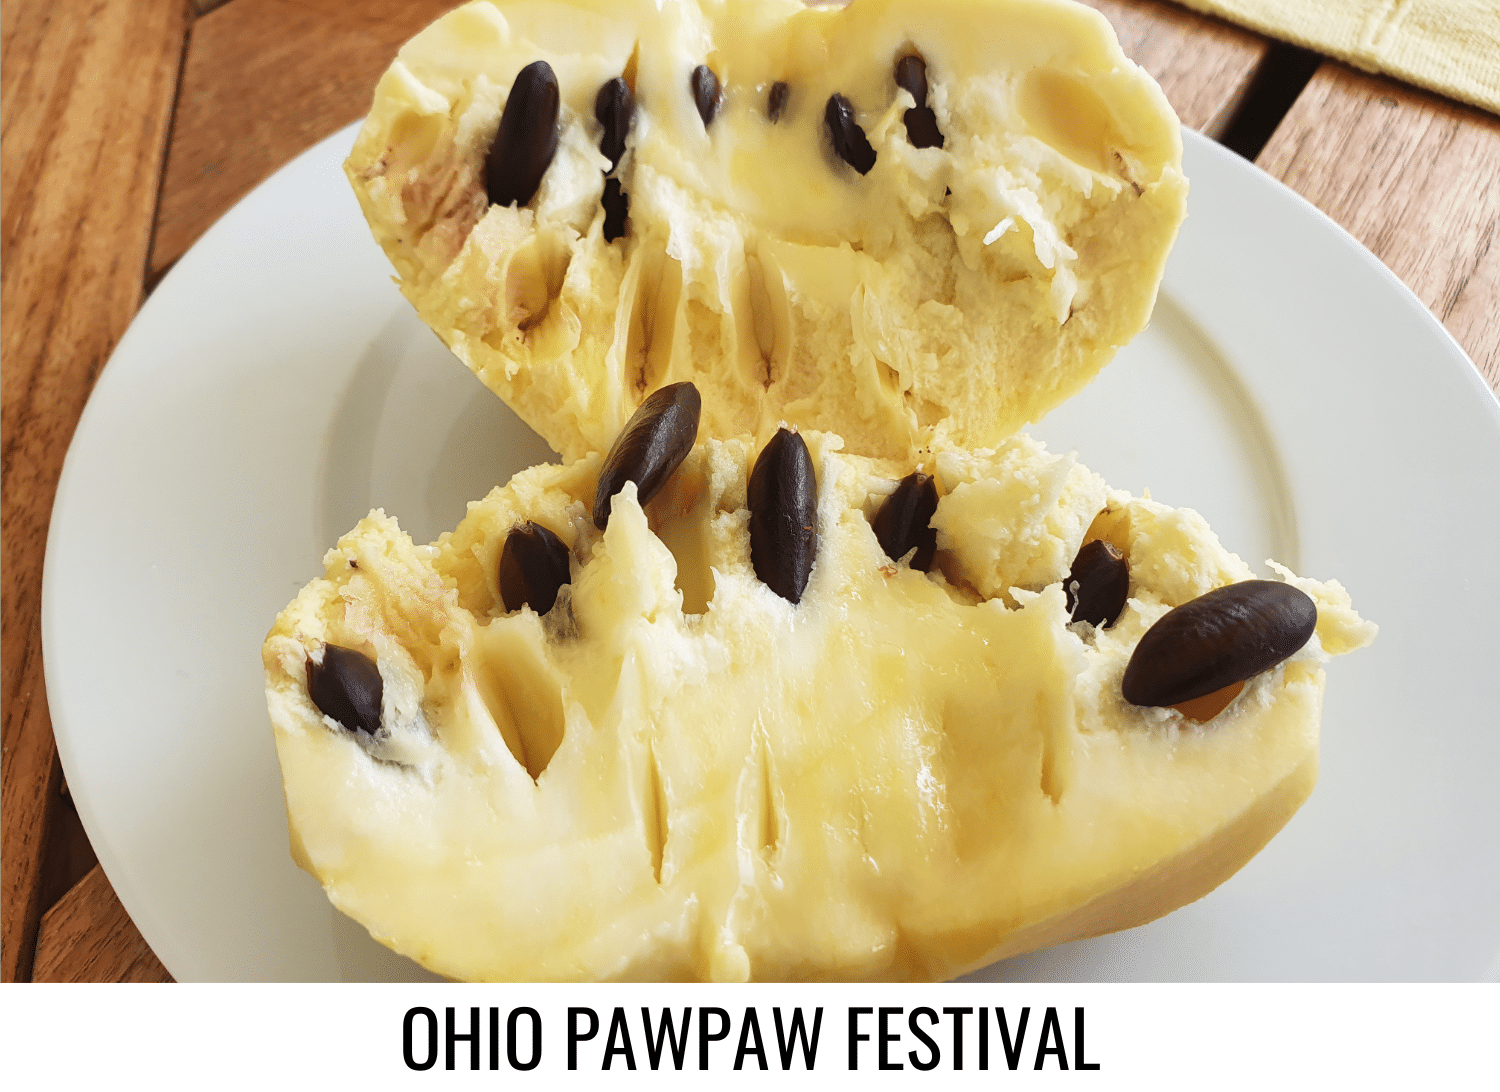 horizontal image with a photo of a pawpaw cut in half on a white plate. A white strip at the bottom has the text Ohio Pawpaw Festival. Image via Canva pro license